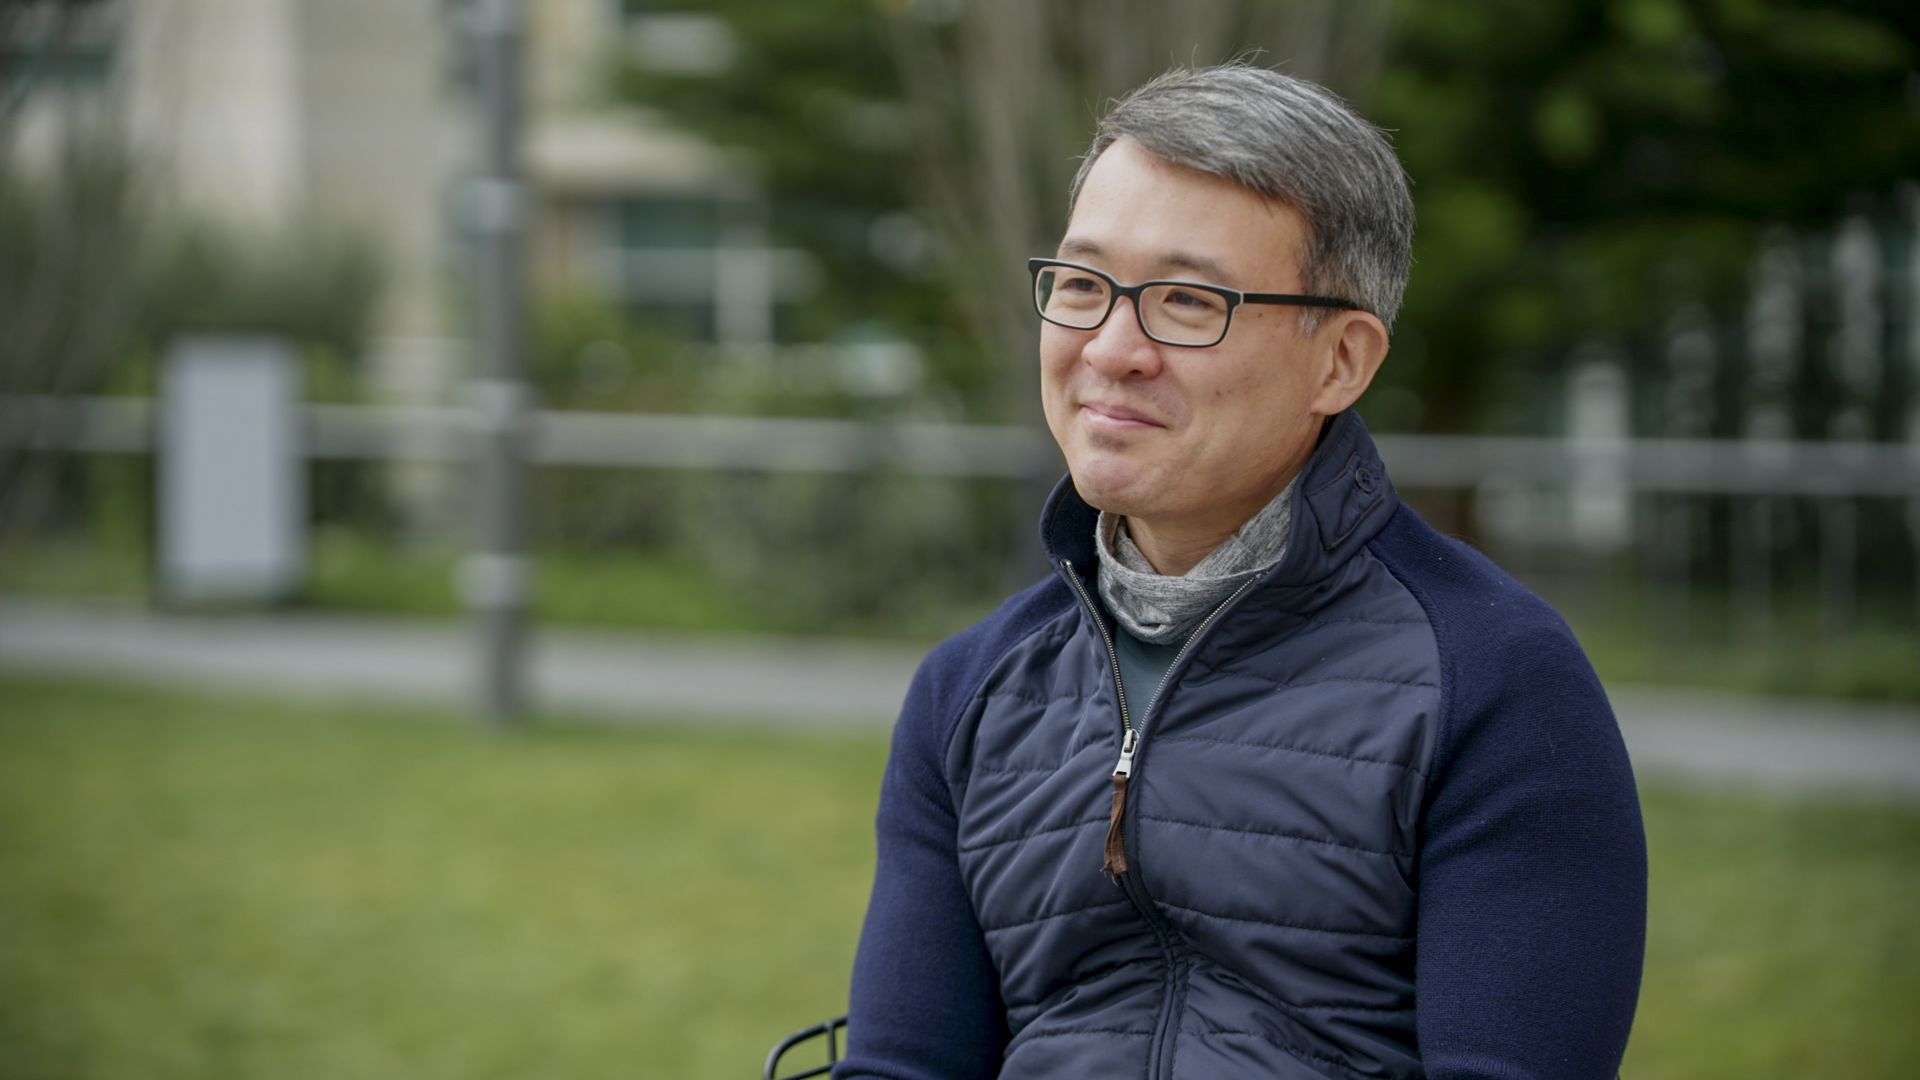 Fitbit CEO James Park, speaking to chief technology correspondent Ina Fried for Axios on HBO